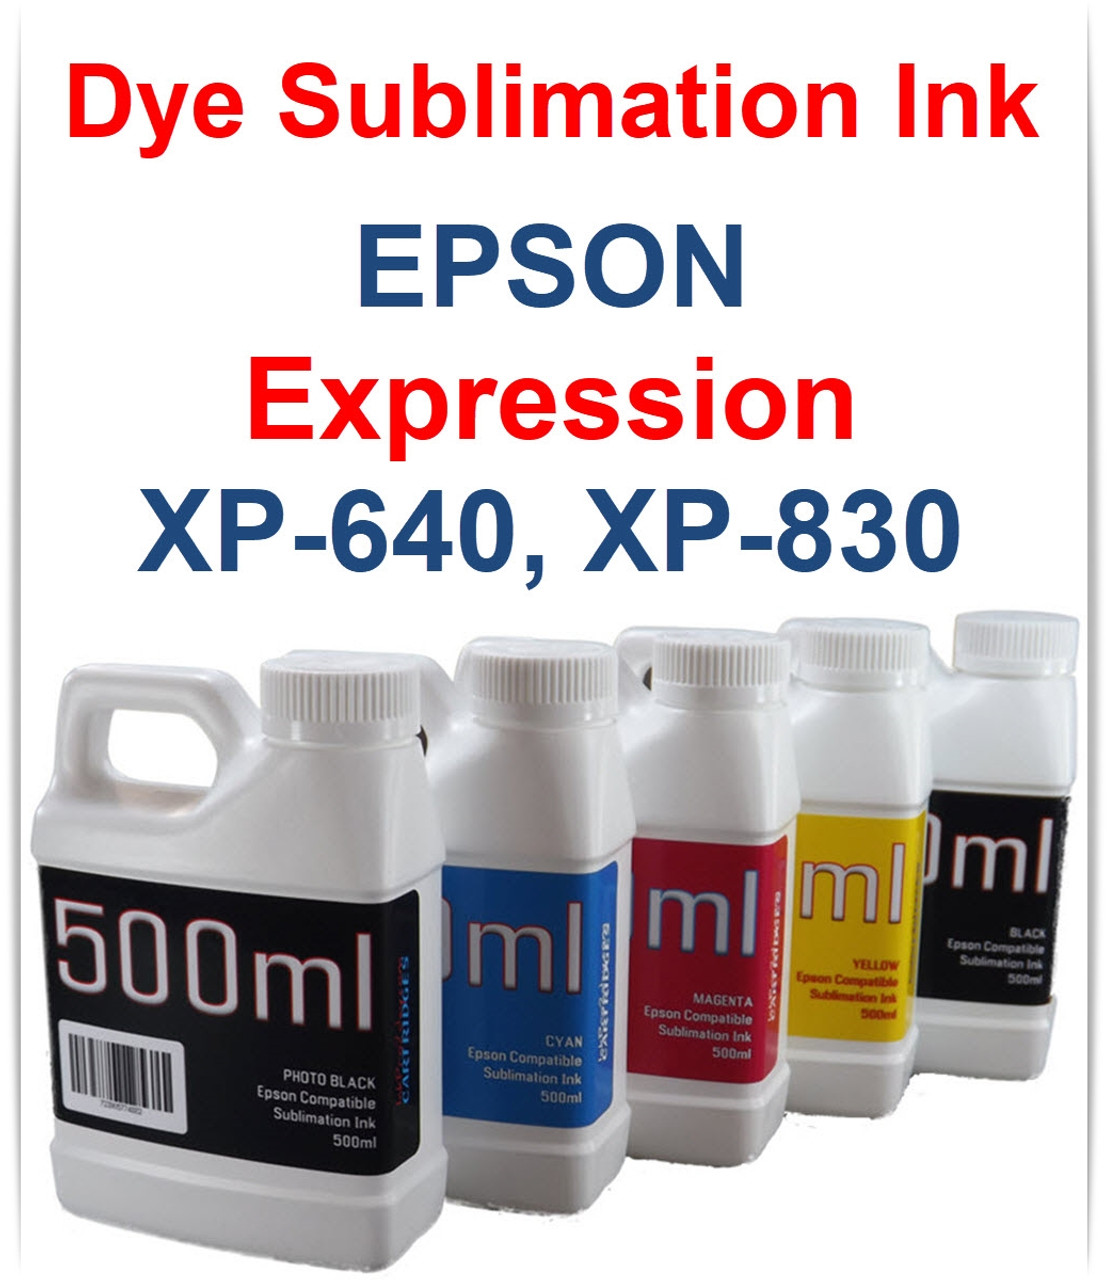 5- 500ml bottles Dye Sublimation Ink for Epson Expression Premium XP-640 XP-830 Printers
 Included Colors: Photo Black, Black, Cyan, Magenta, Yellow 500ml bottles Dye Sublimation ink